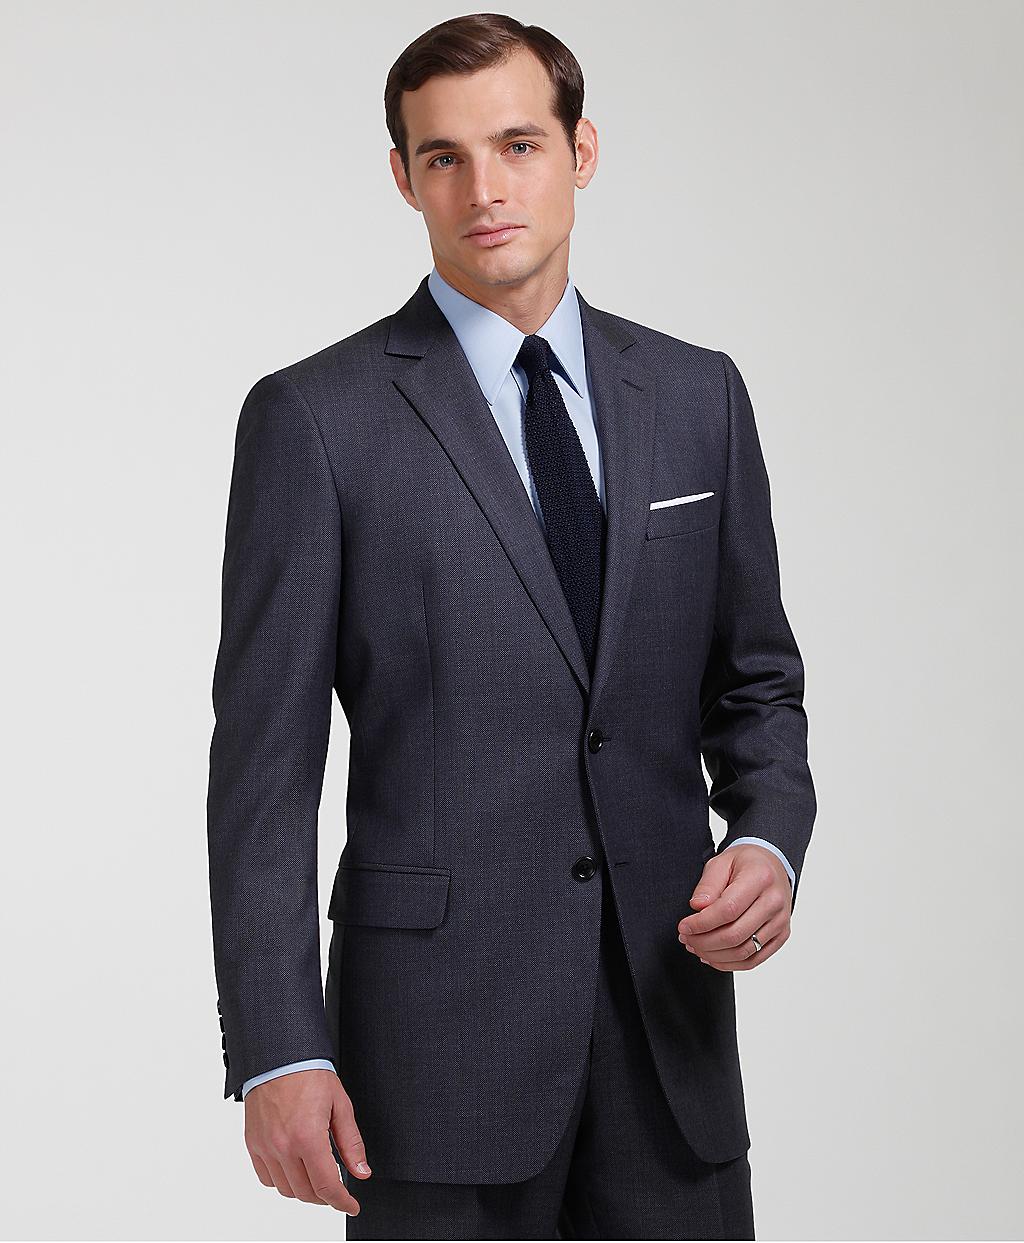 Lyst - Brooks Brothers Fitzgerald Birdseye Suit in Blue for Men